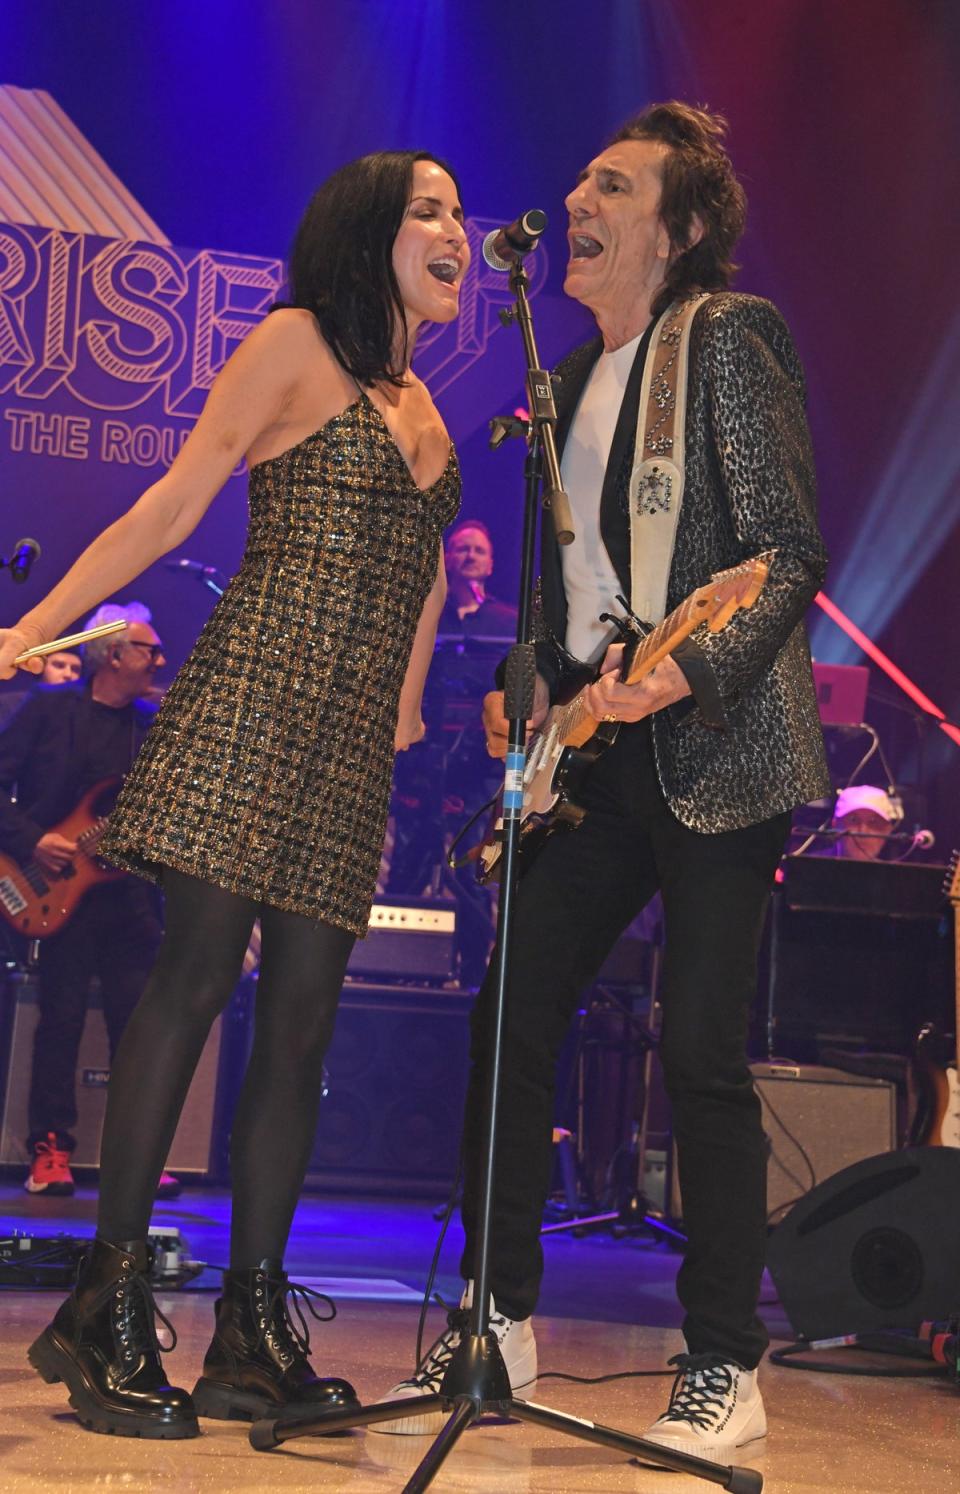 Andrea Corr and Ronnie Wood perform at The Roundhouse Gala in 2022 (Dave Benett/Getty Images for The Roundhouse)